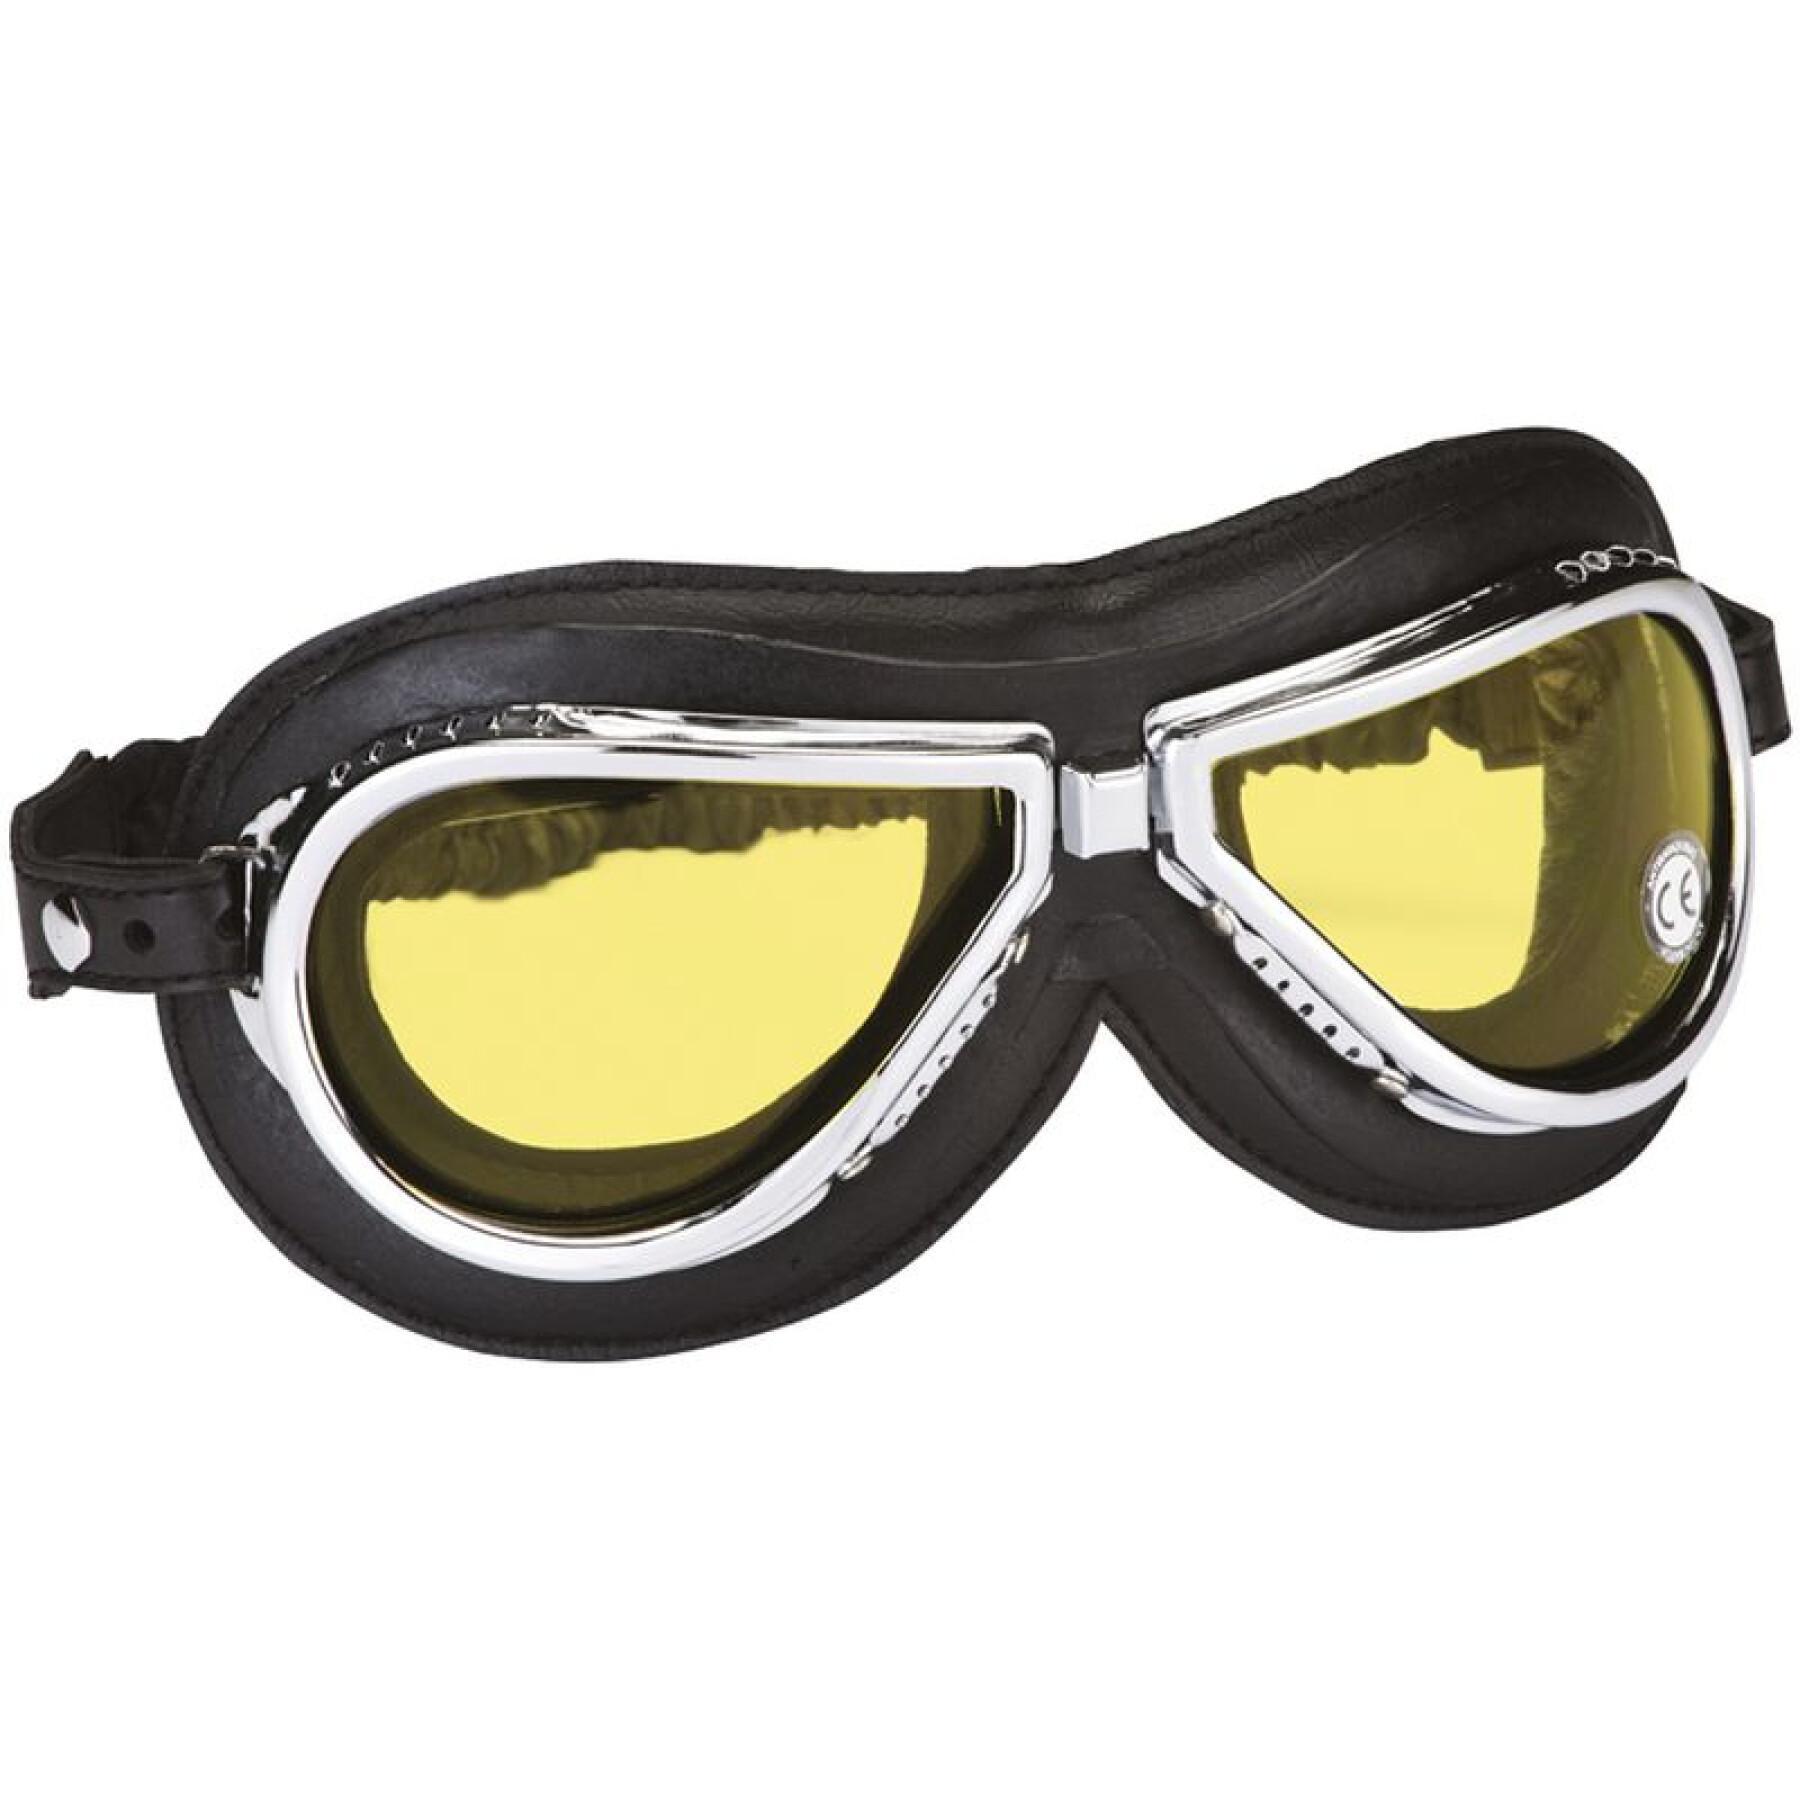 Motorcycle goggles Climax 500 – LU 12